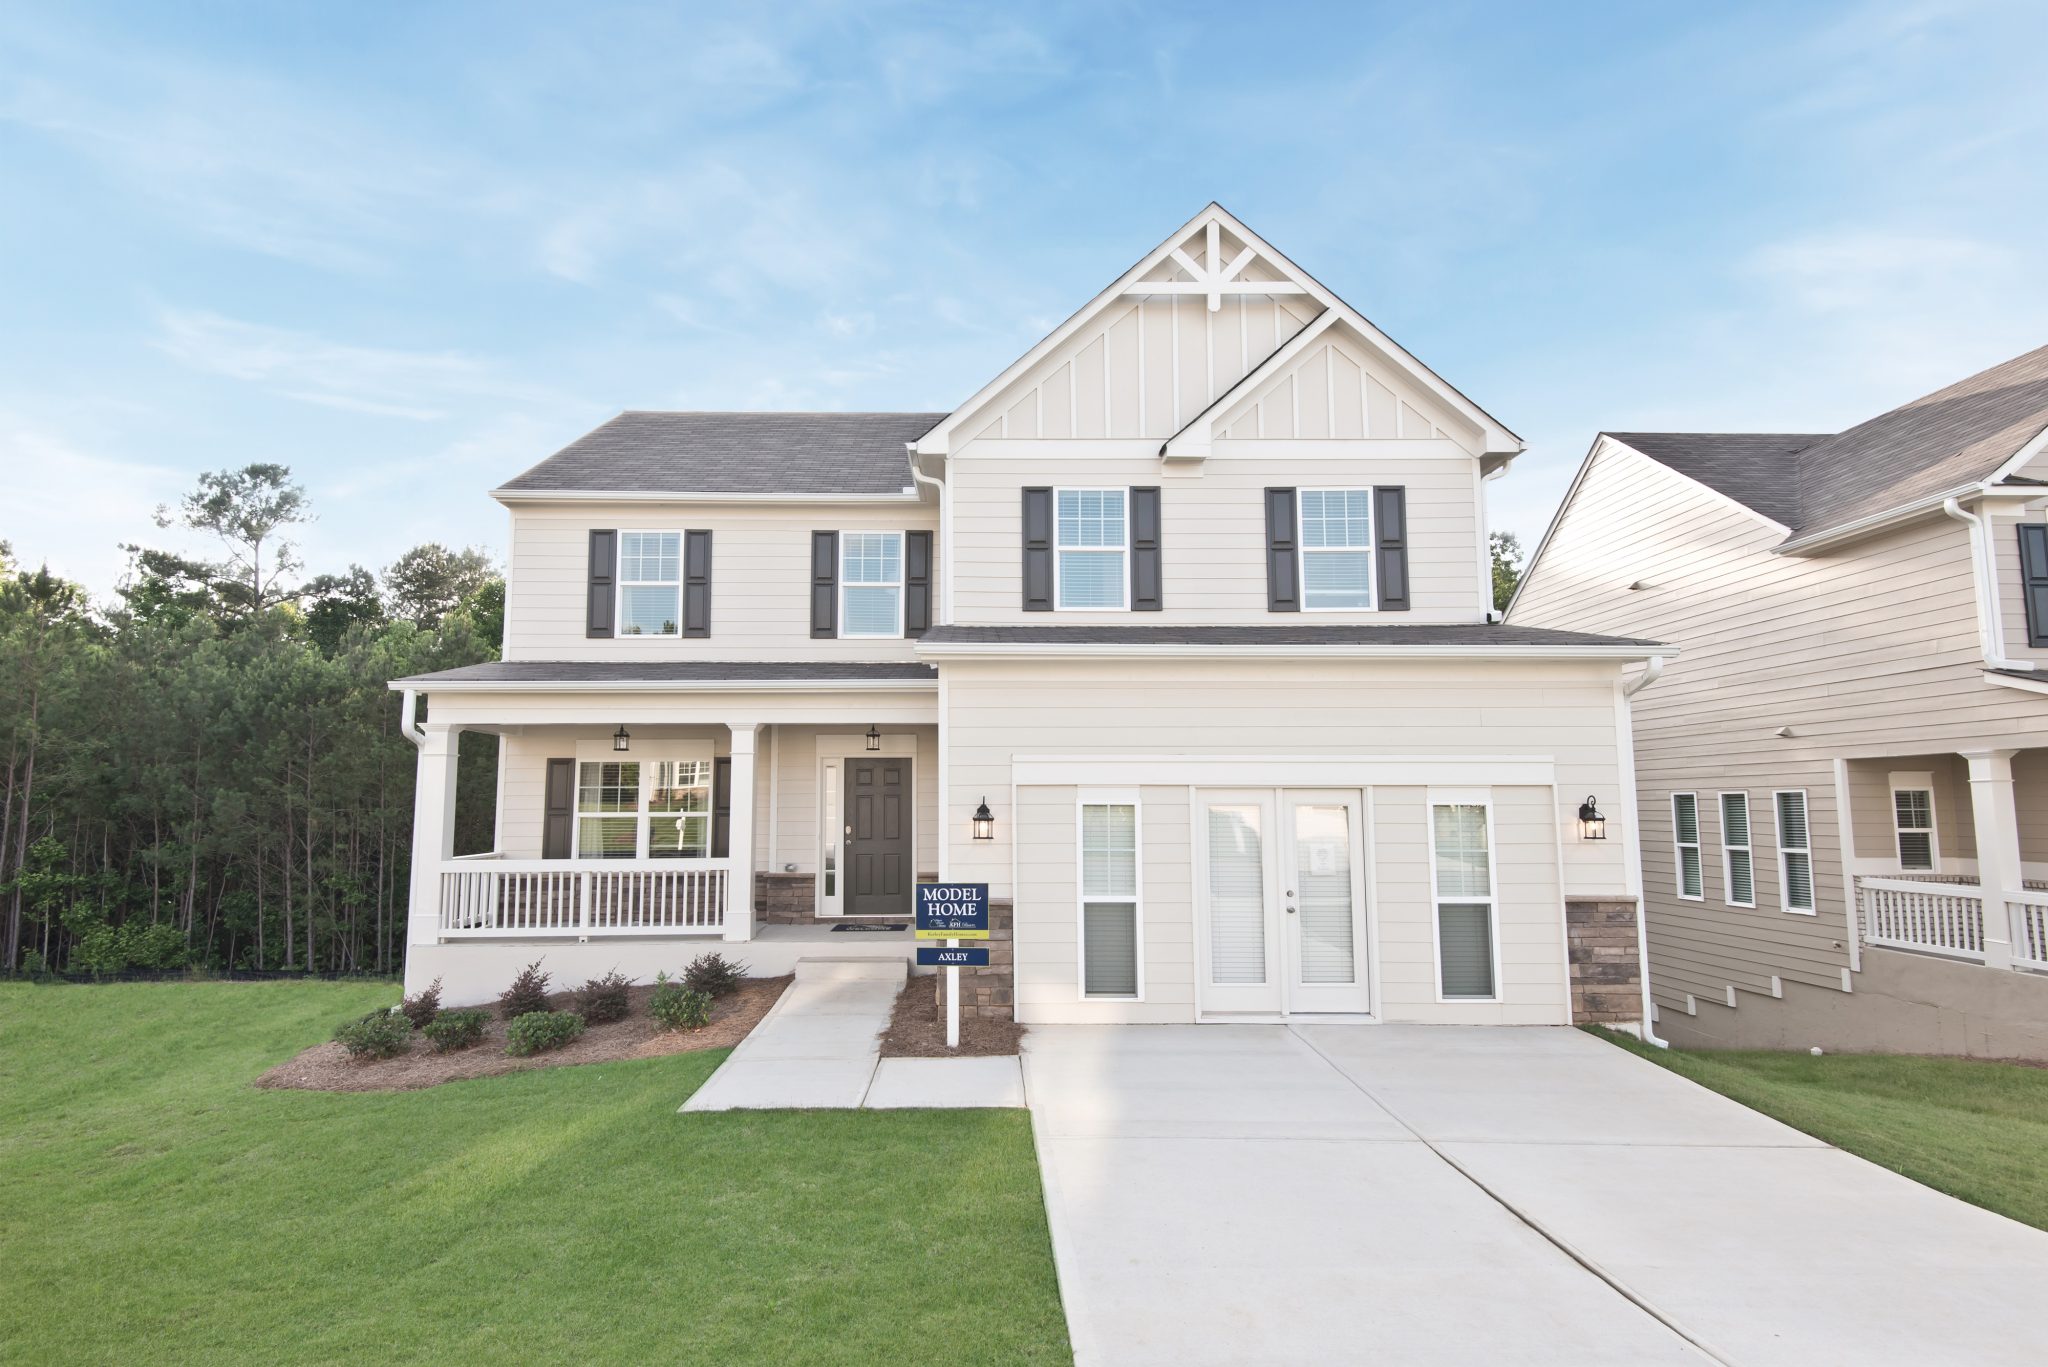 A new home in dallas and paulding at Hickory Creek